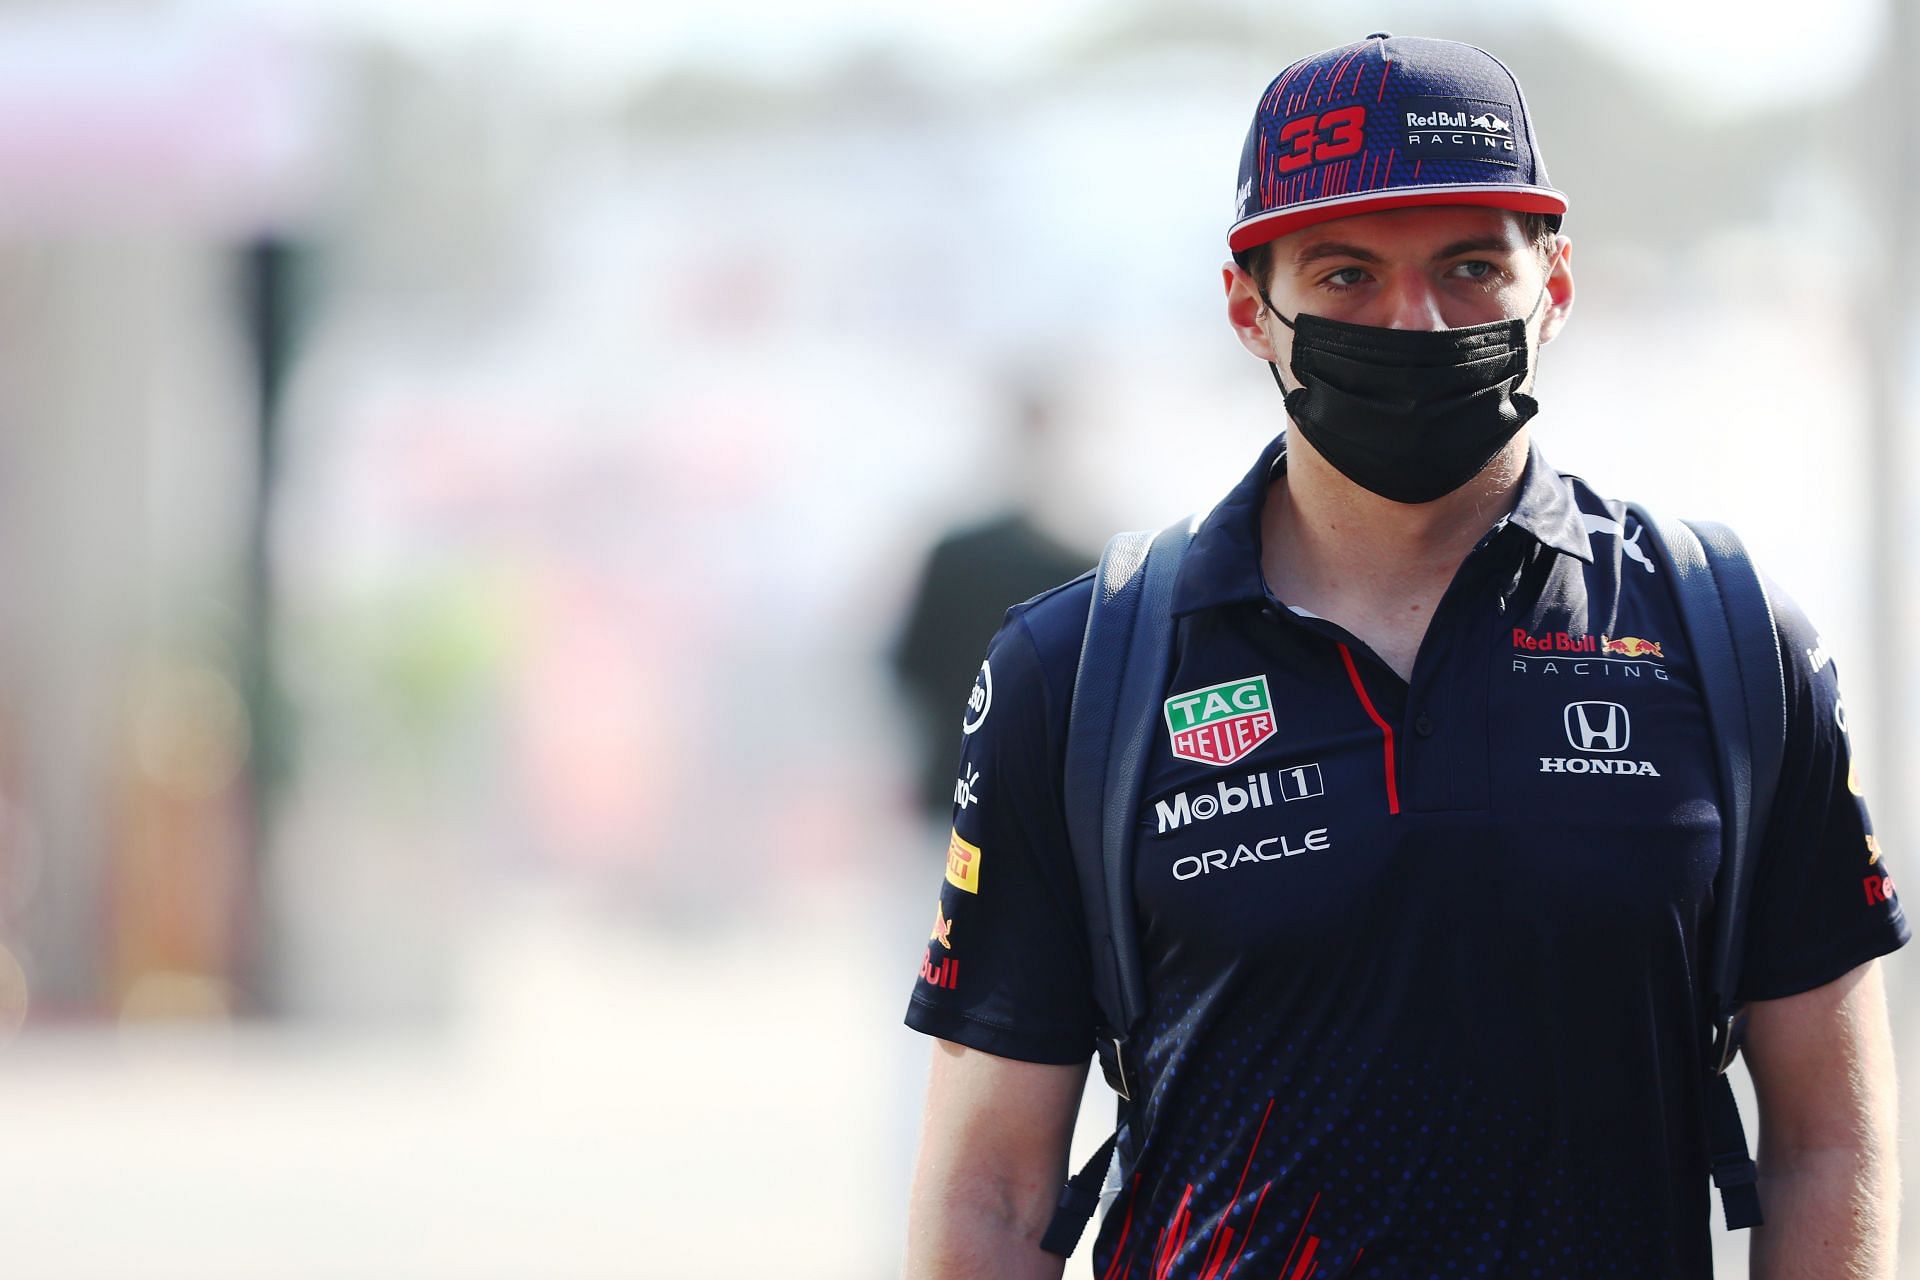 Max Verstappen walks into the Paddock before practice ahead of the 2021 Saudi Arabian Grand Prix. (Photo by Mark Thompson/Getty Images)